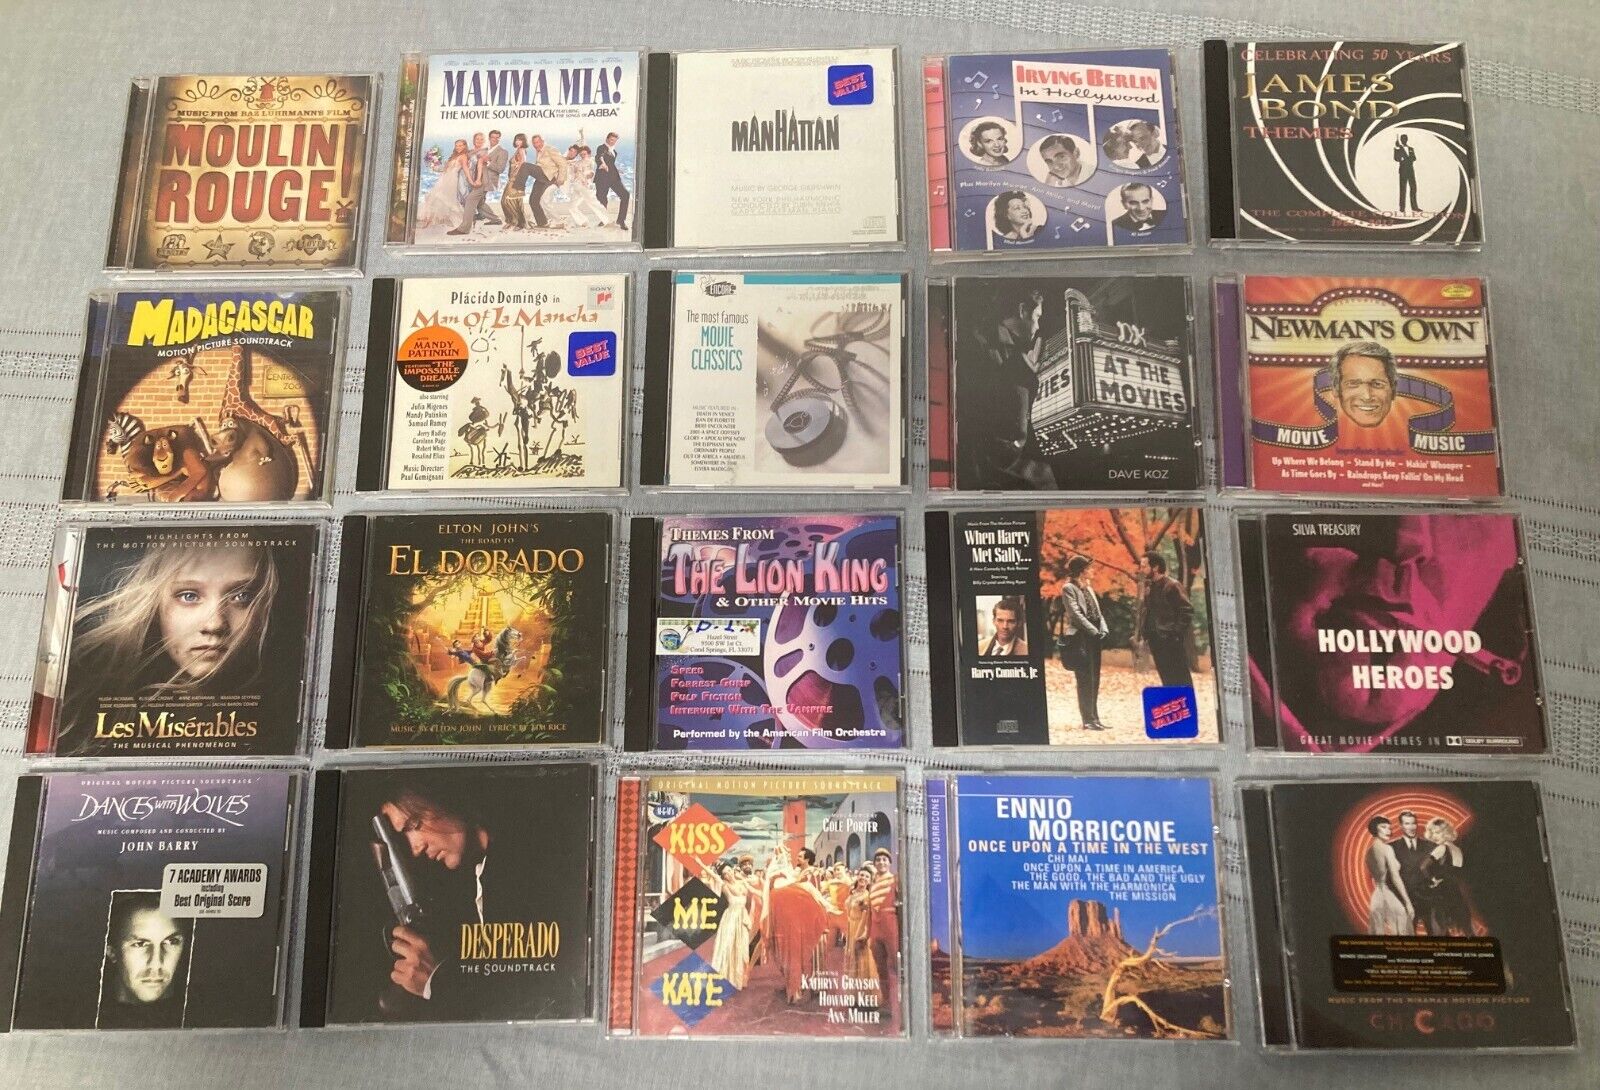 LOT of 20 CDs MOVIE SOUNDTRACKS + Themes + Movie MUSICALS cd LOT Listed